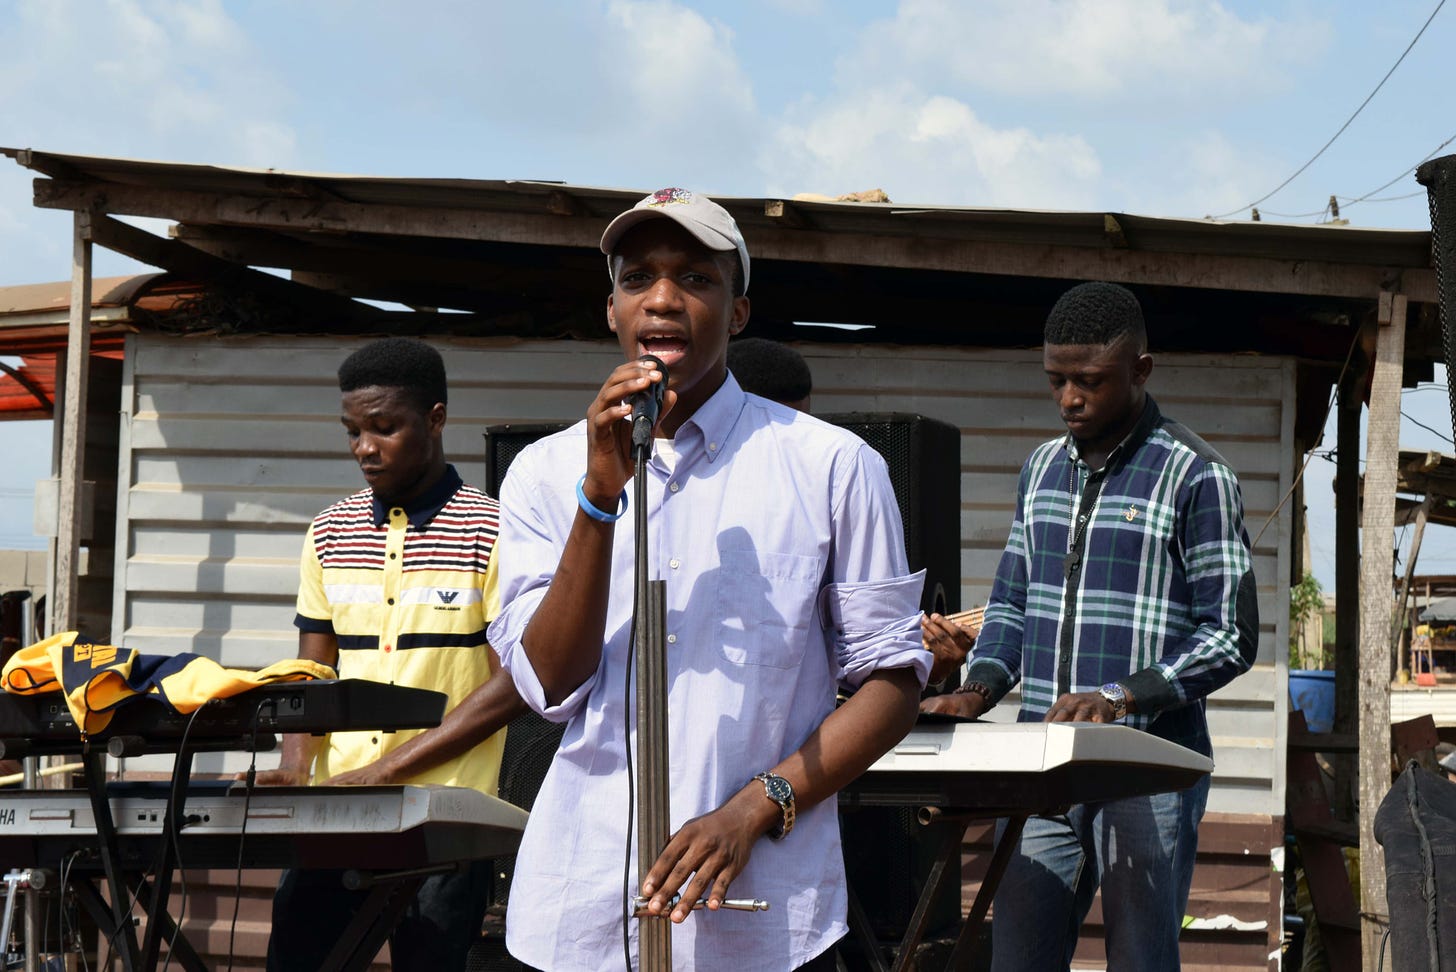 A picture of me outdoors, singing into a microphone on a mic stand. I am standing in front of two keyboardists, wearing a light purple shirt and a cap.